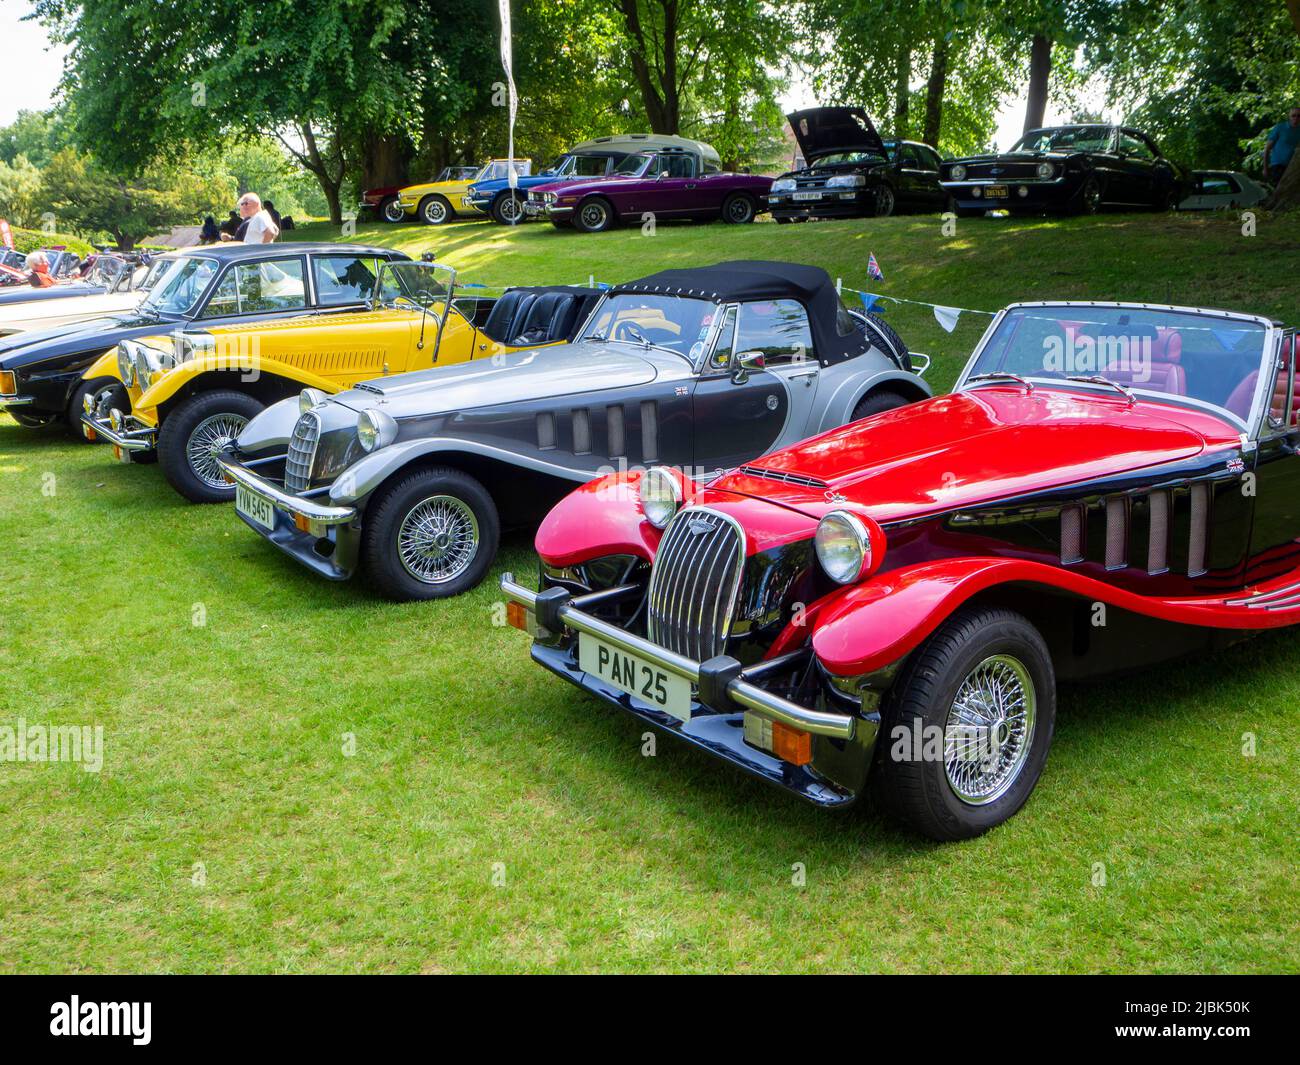 Three Panther classic cars on display at a classic car show Stock Photo